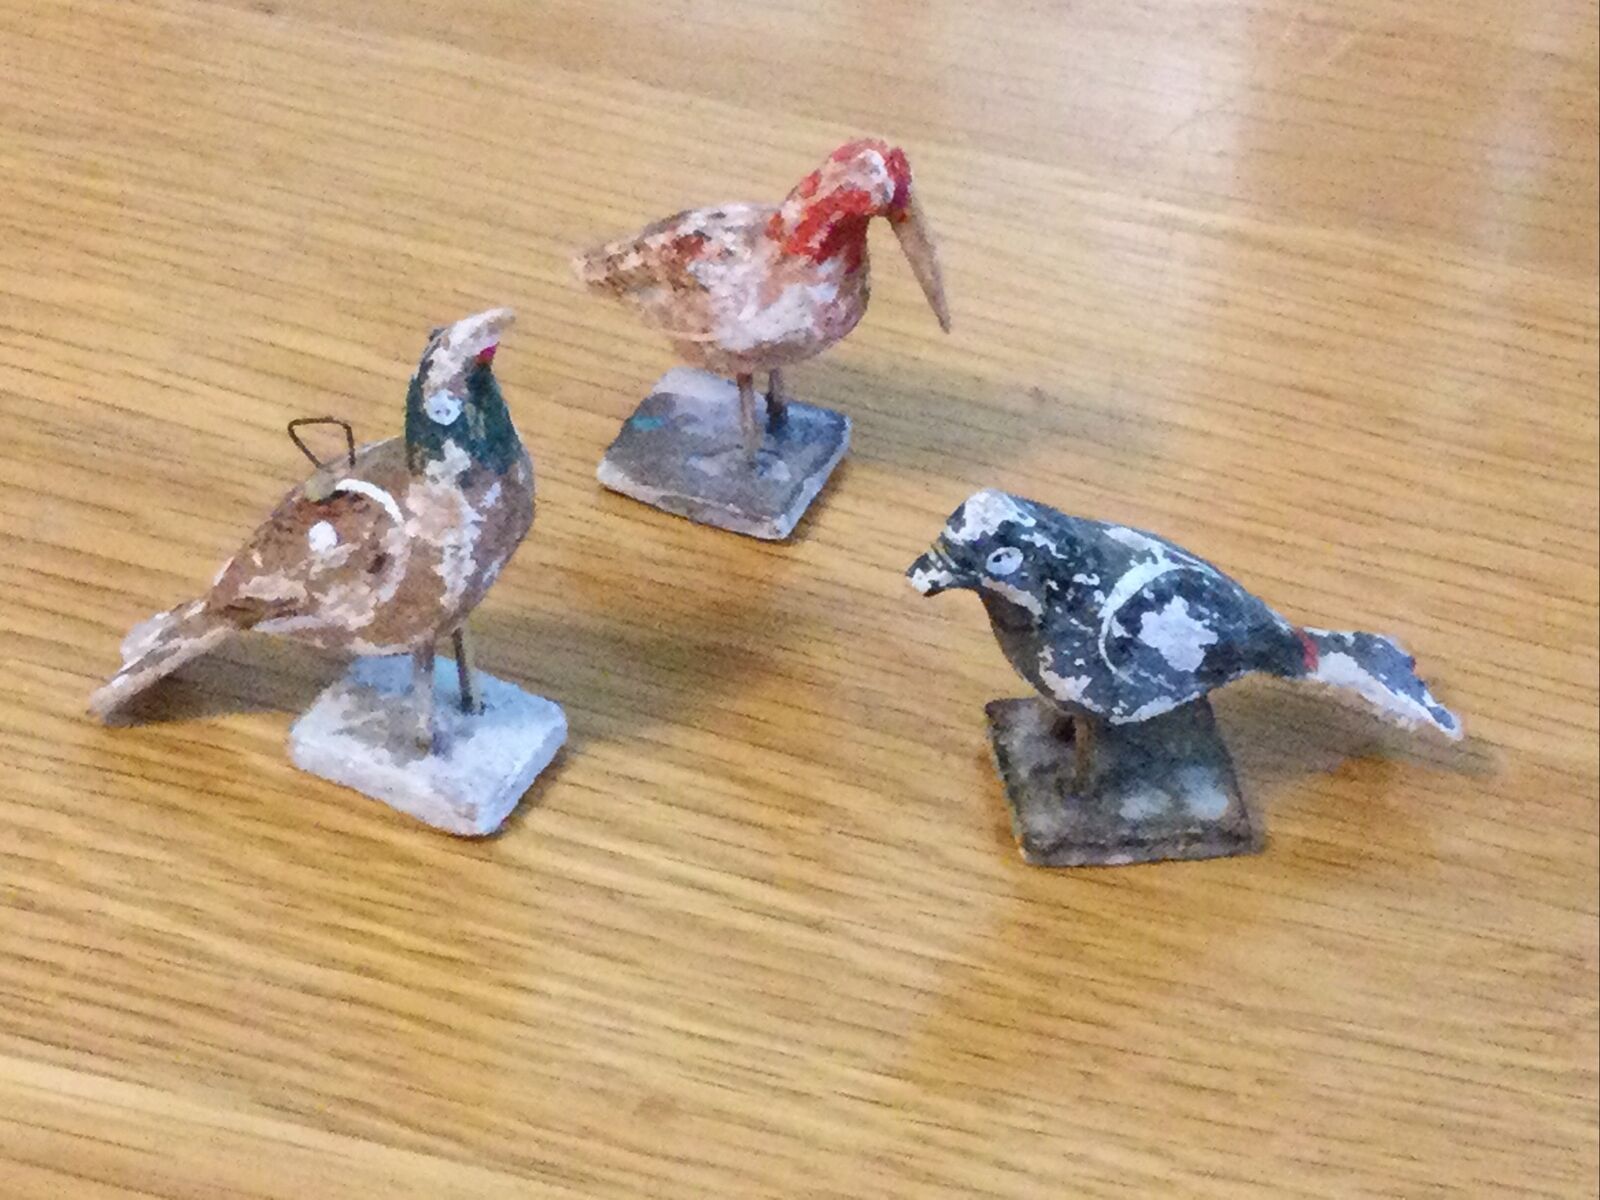 Vintage/ Antique Wooden Carved Painted BIRD MINIATURES Figurine/ Ornament Lot